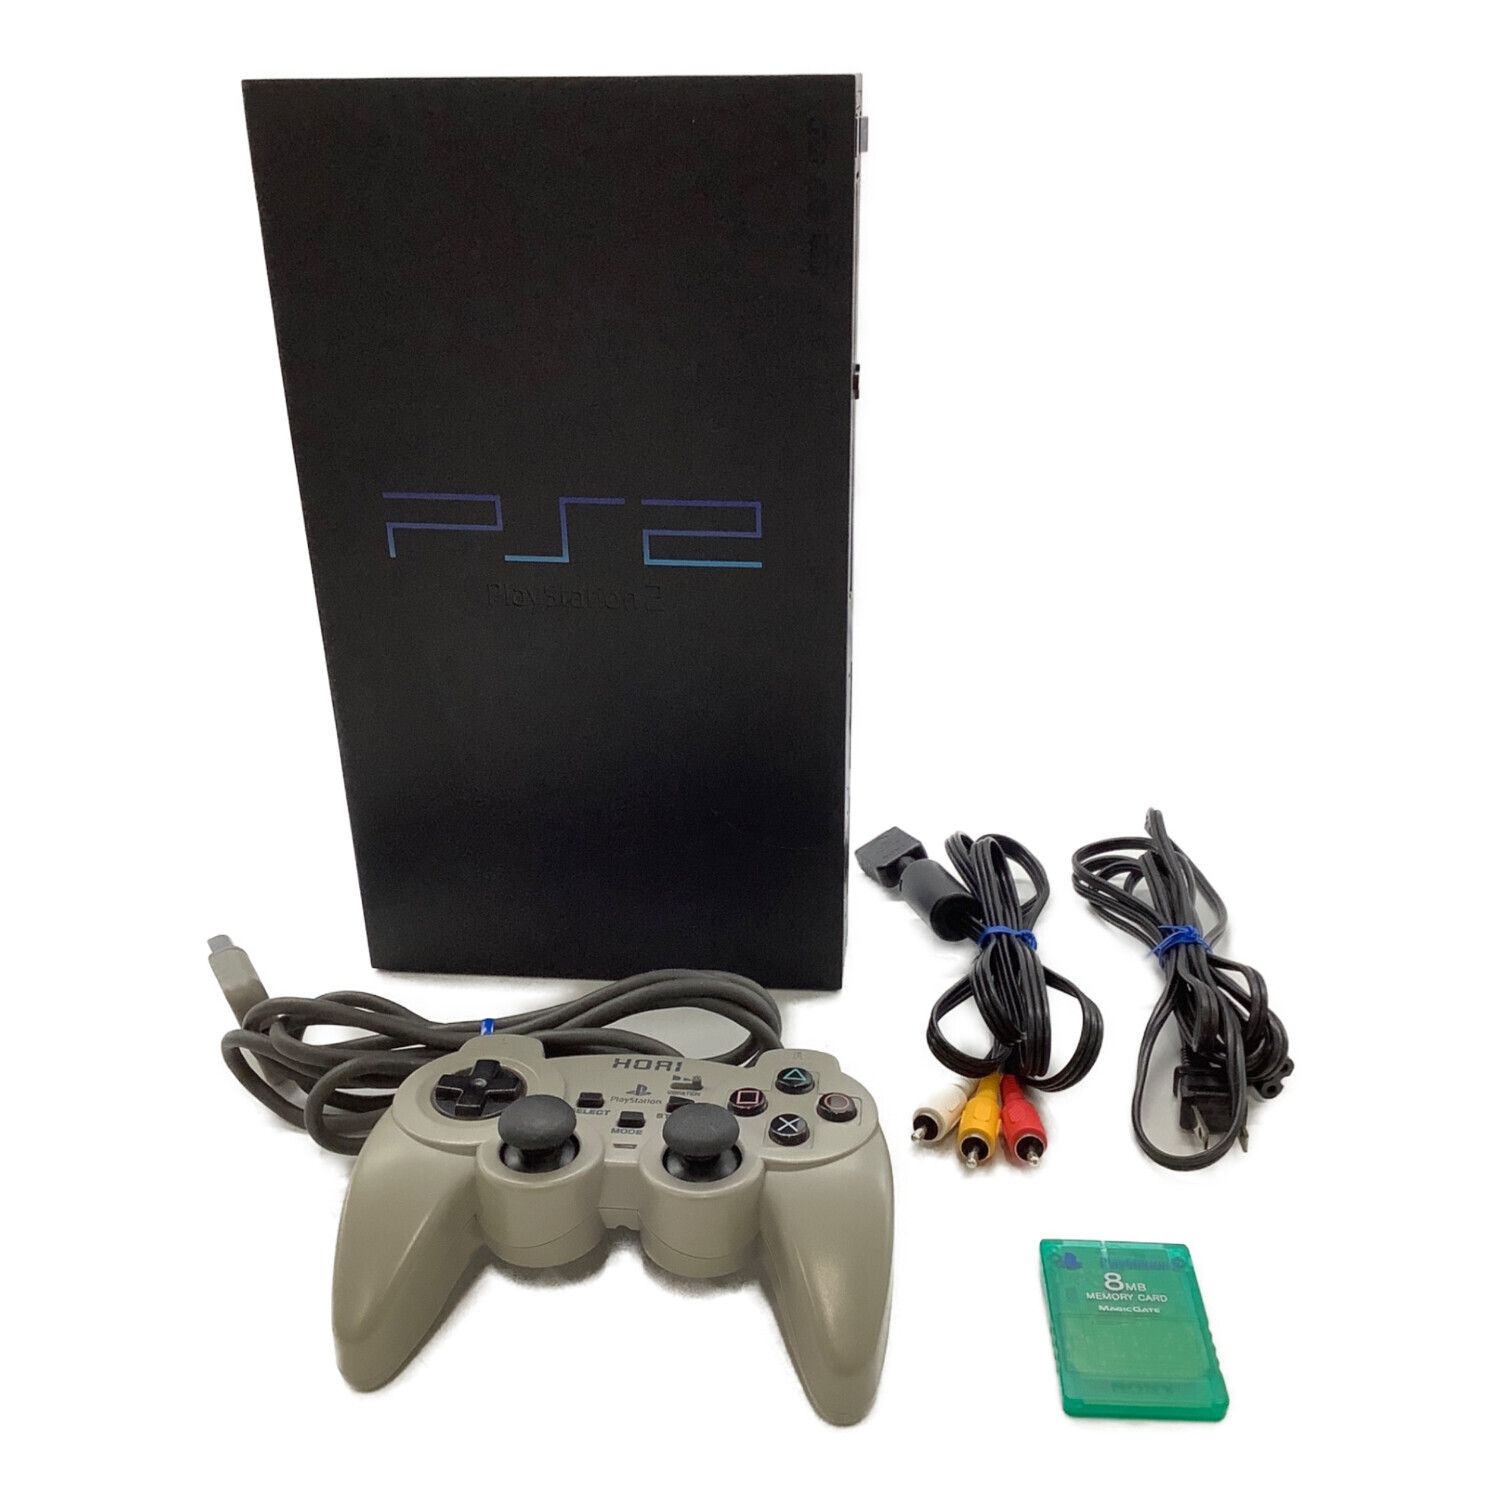 GUARANTEED Slim Sony Playstation2 Console PS2 2 BRAND NEW Controllers E